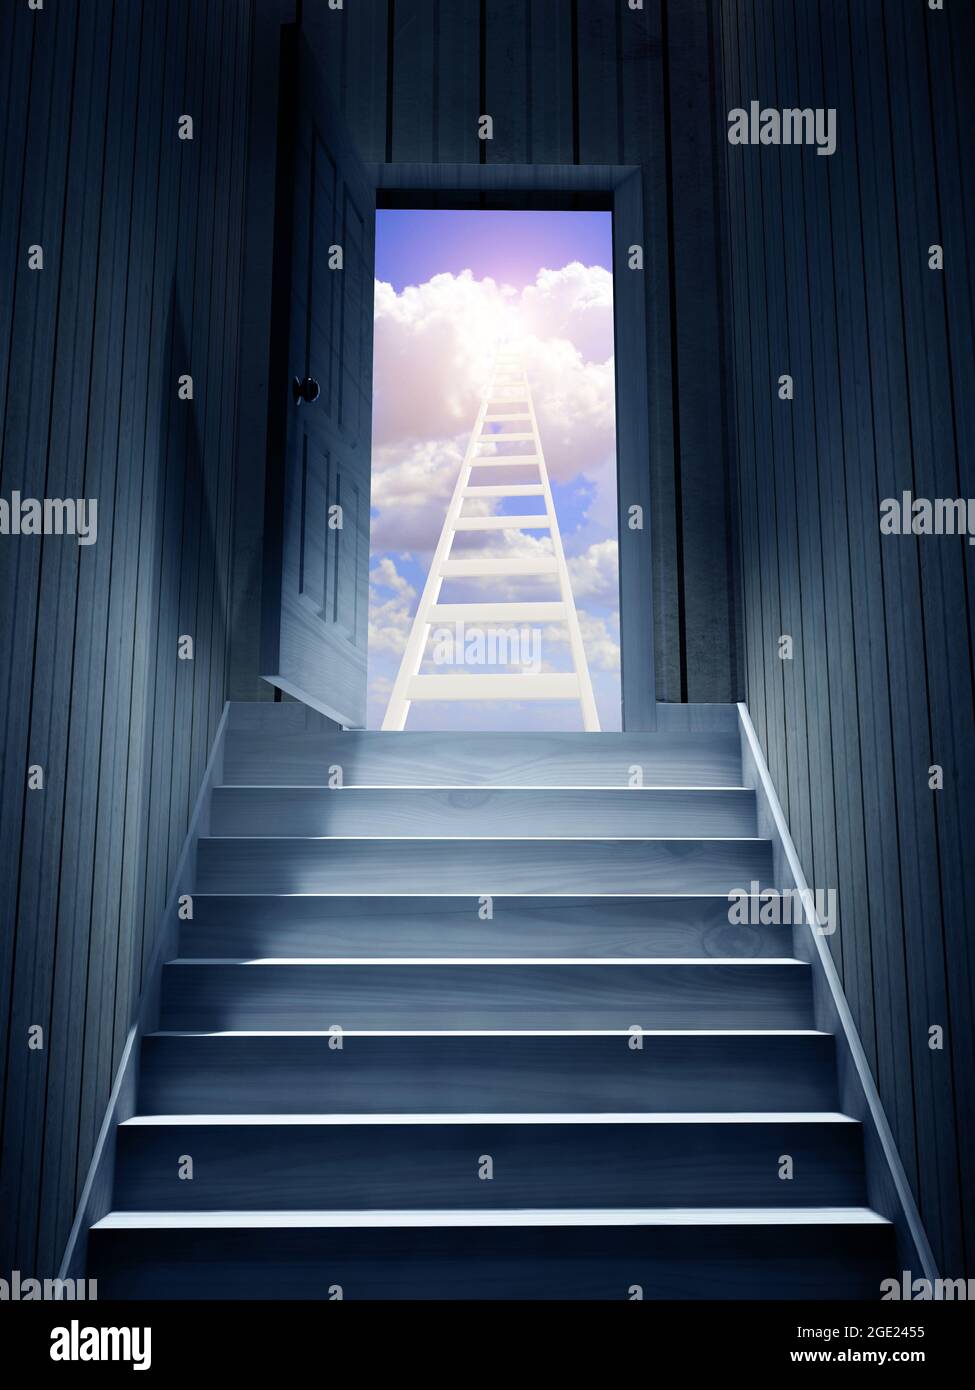 Hope and spirituality concept. Steps leading from a dark basement to open the door. Blue sky with clouds and ladder to sky visible through an open doo Stock Photo